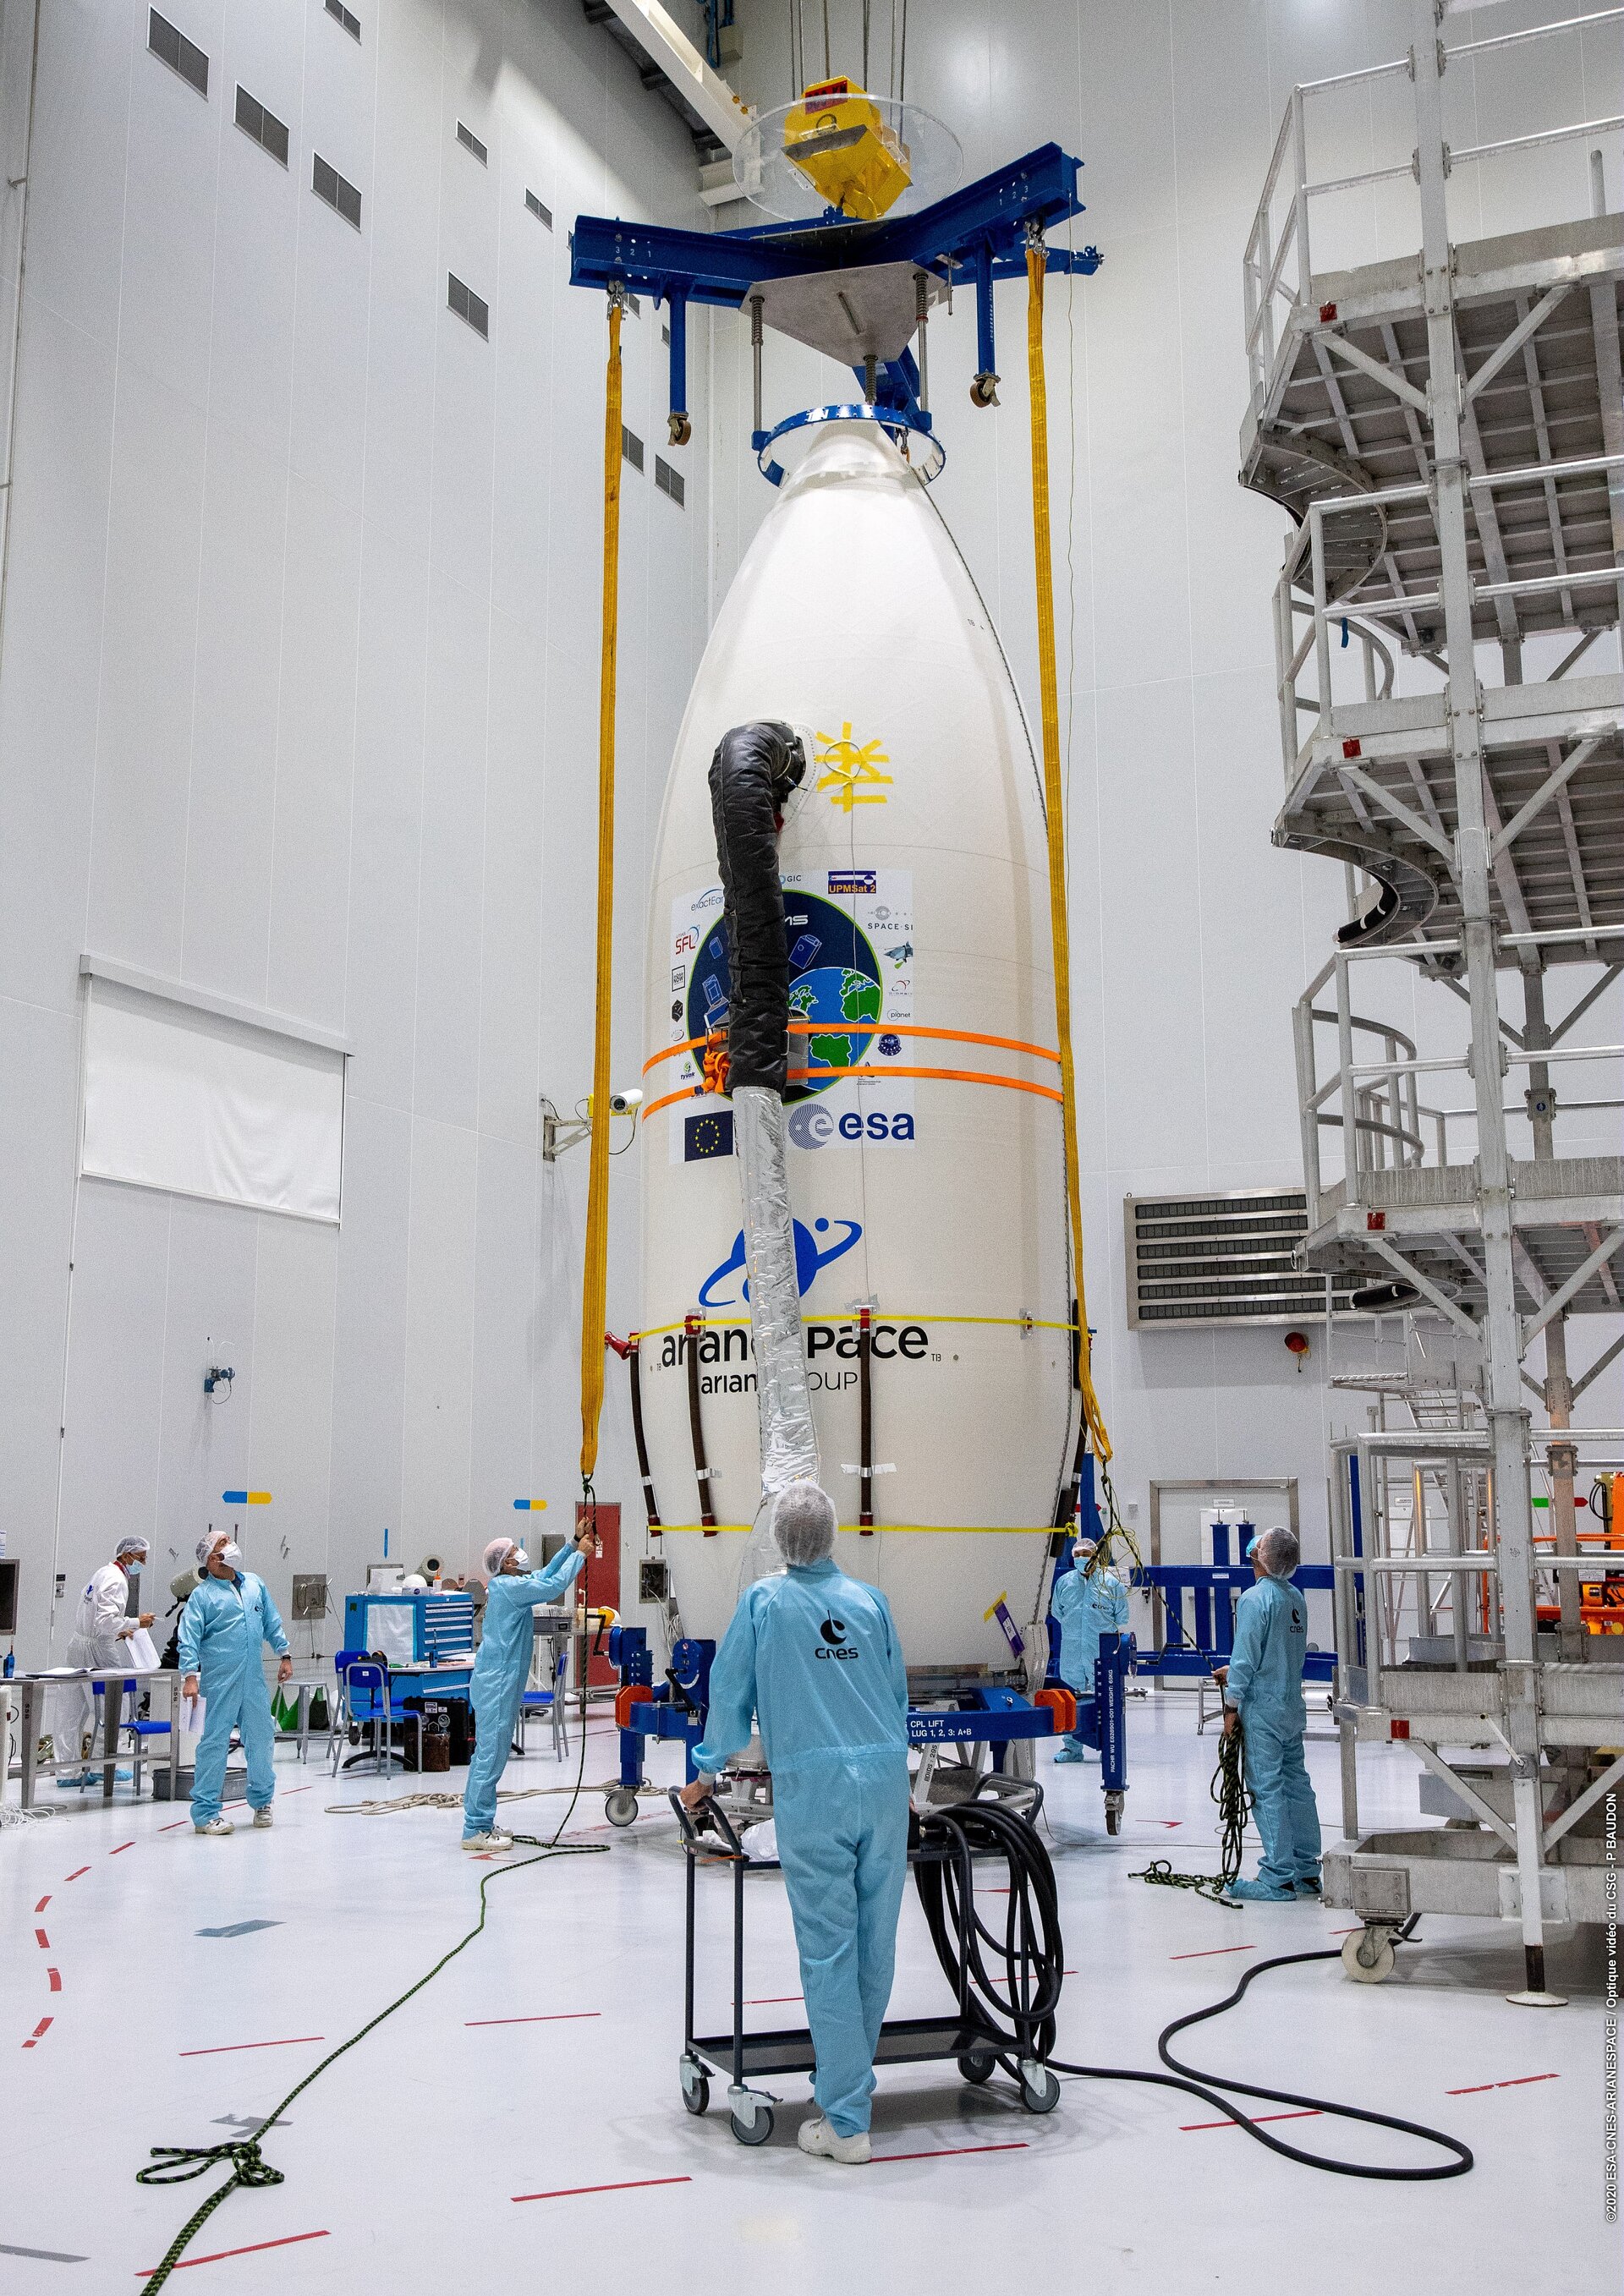 Vega's Small Spacecraft Mission Service (SSMS) dispenser holding 53 satellites is stowed inside Vega's fairing at Europe's Spaceport.